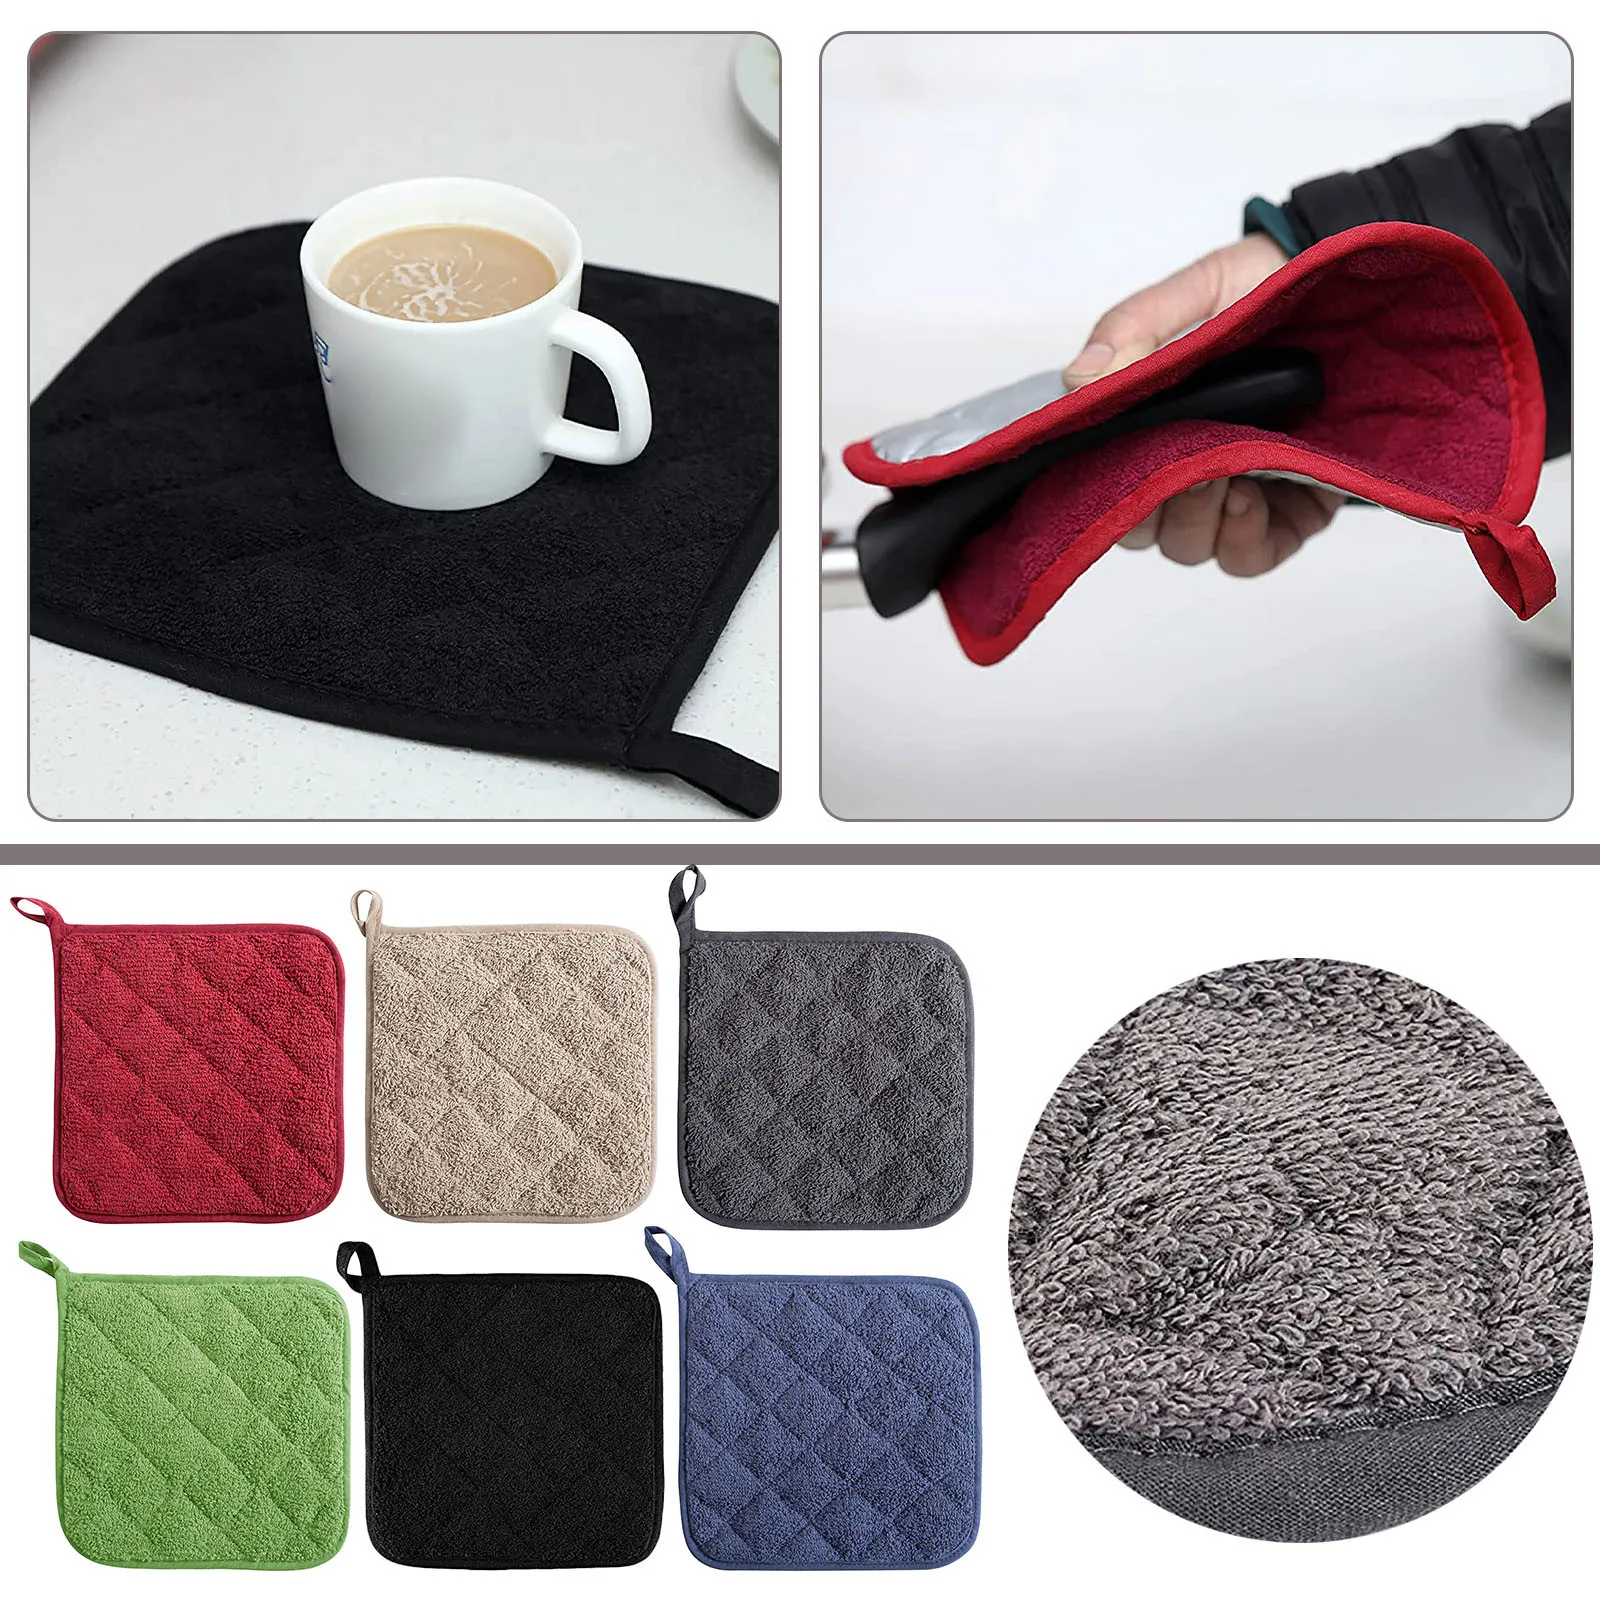 

1Pcs Cotton Table Toweling Heat Insulation Mat Microwave Glove Pan Oven Cloth Resistant Kitchen Placemats Pot Holder